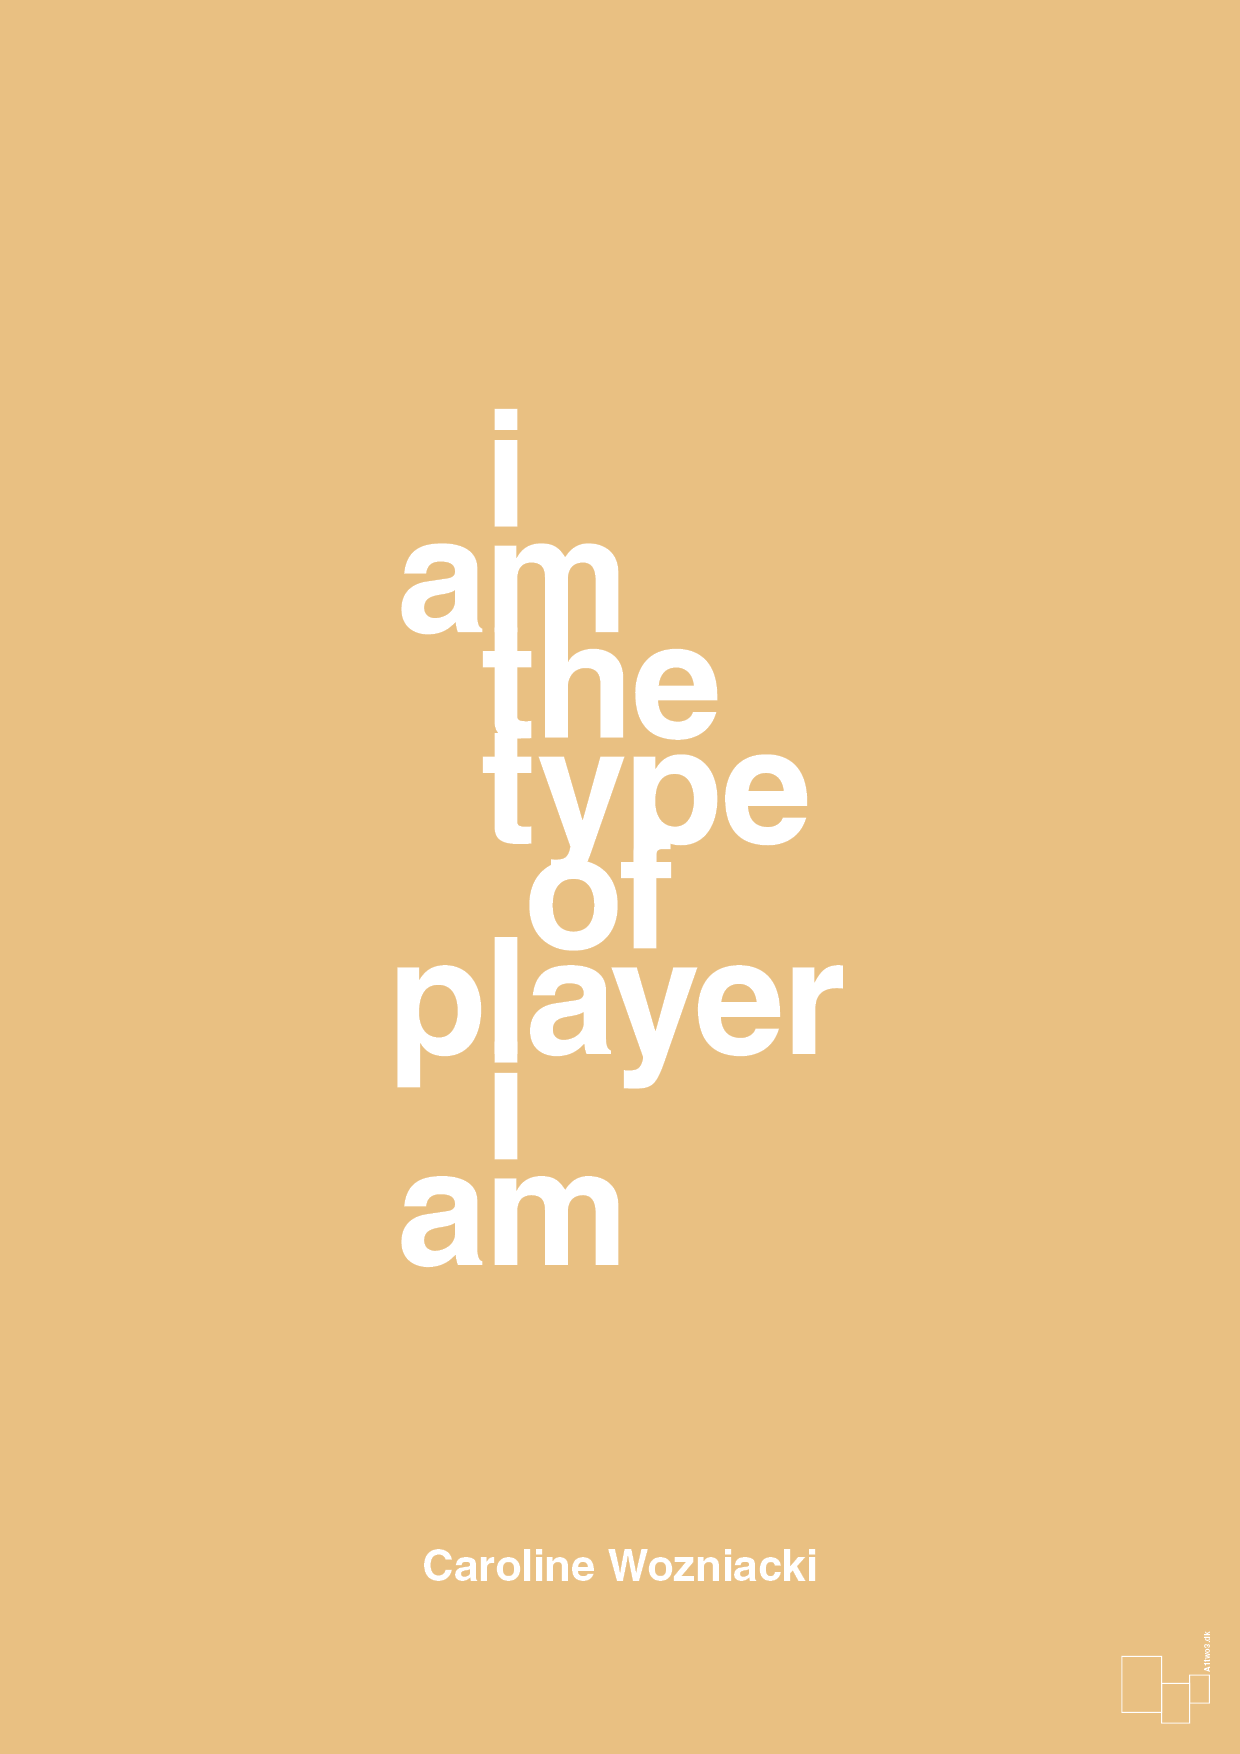 i am the type of player i am - Plakat med Citater i Charismatic